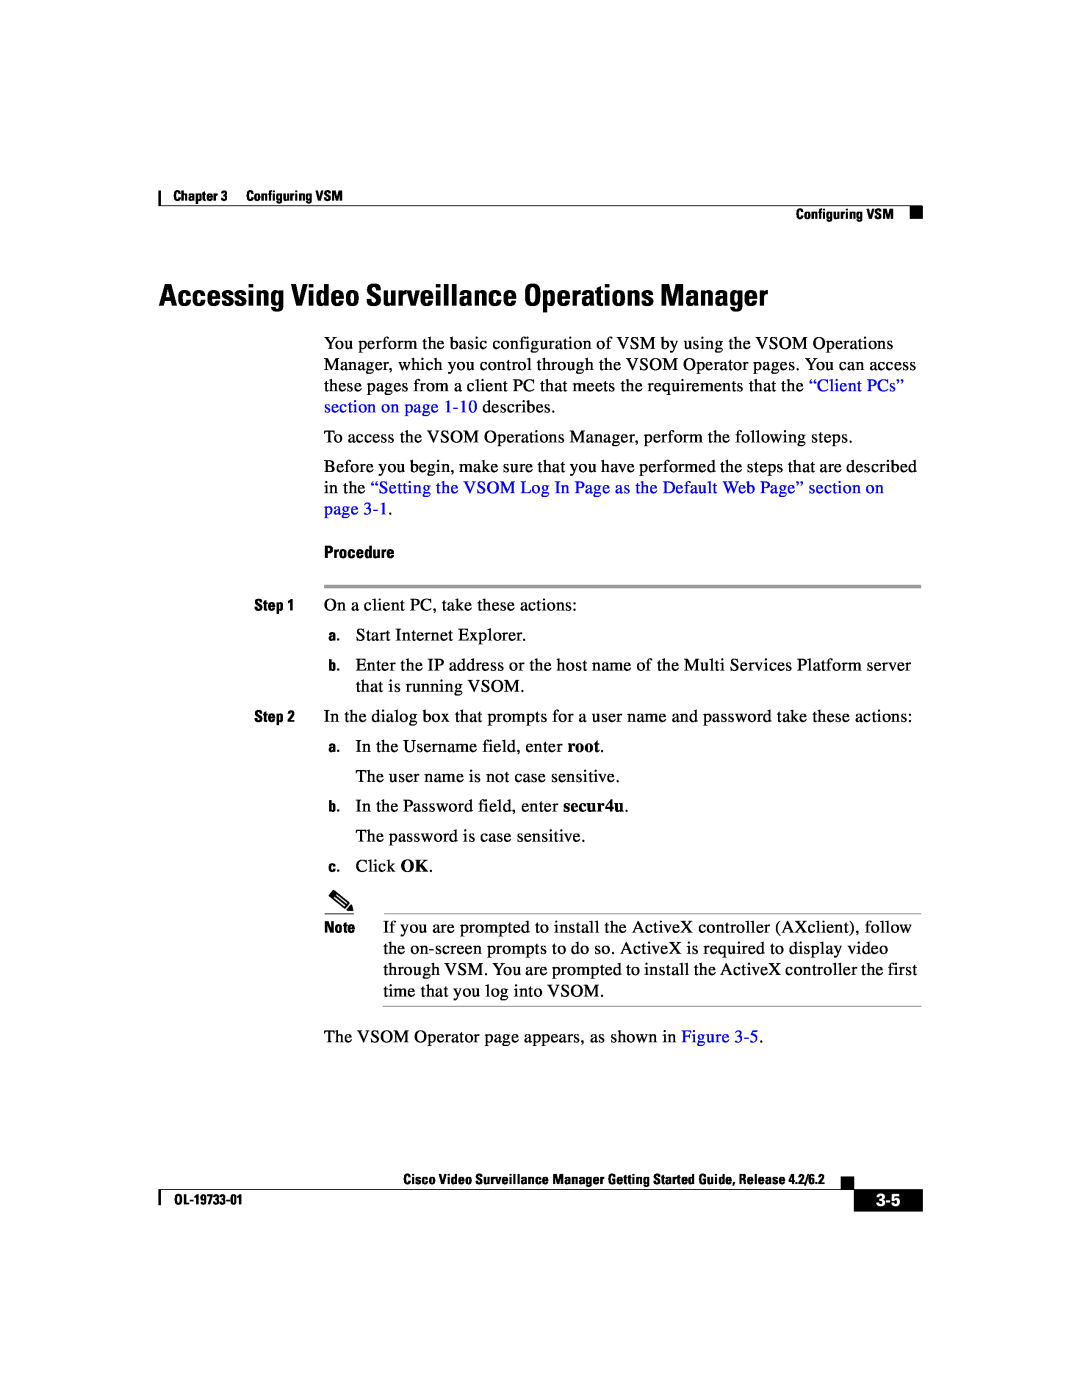 Cisco Systems Release 4.2 manual Accessing Video Surveillance Operations Manager, Procedure 